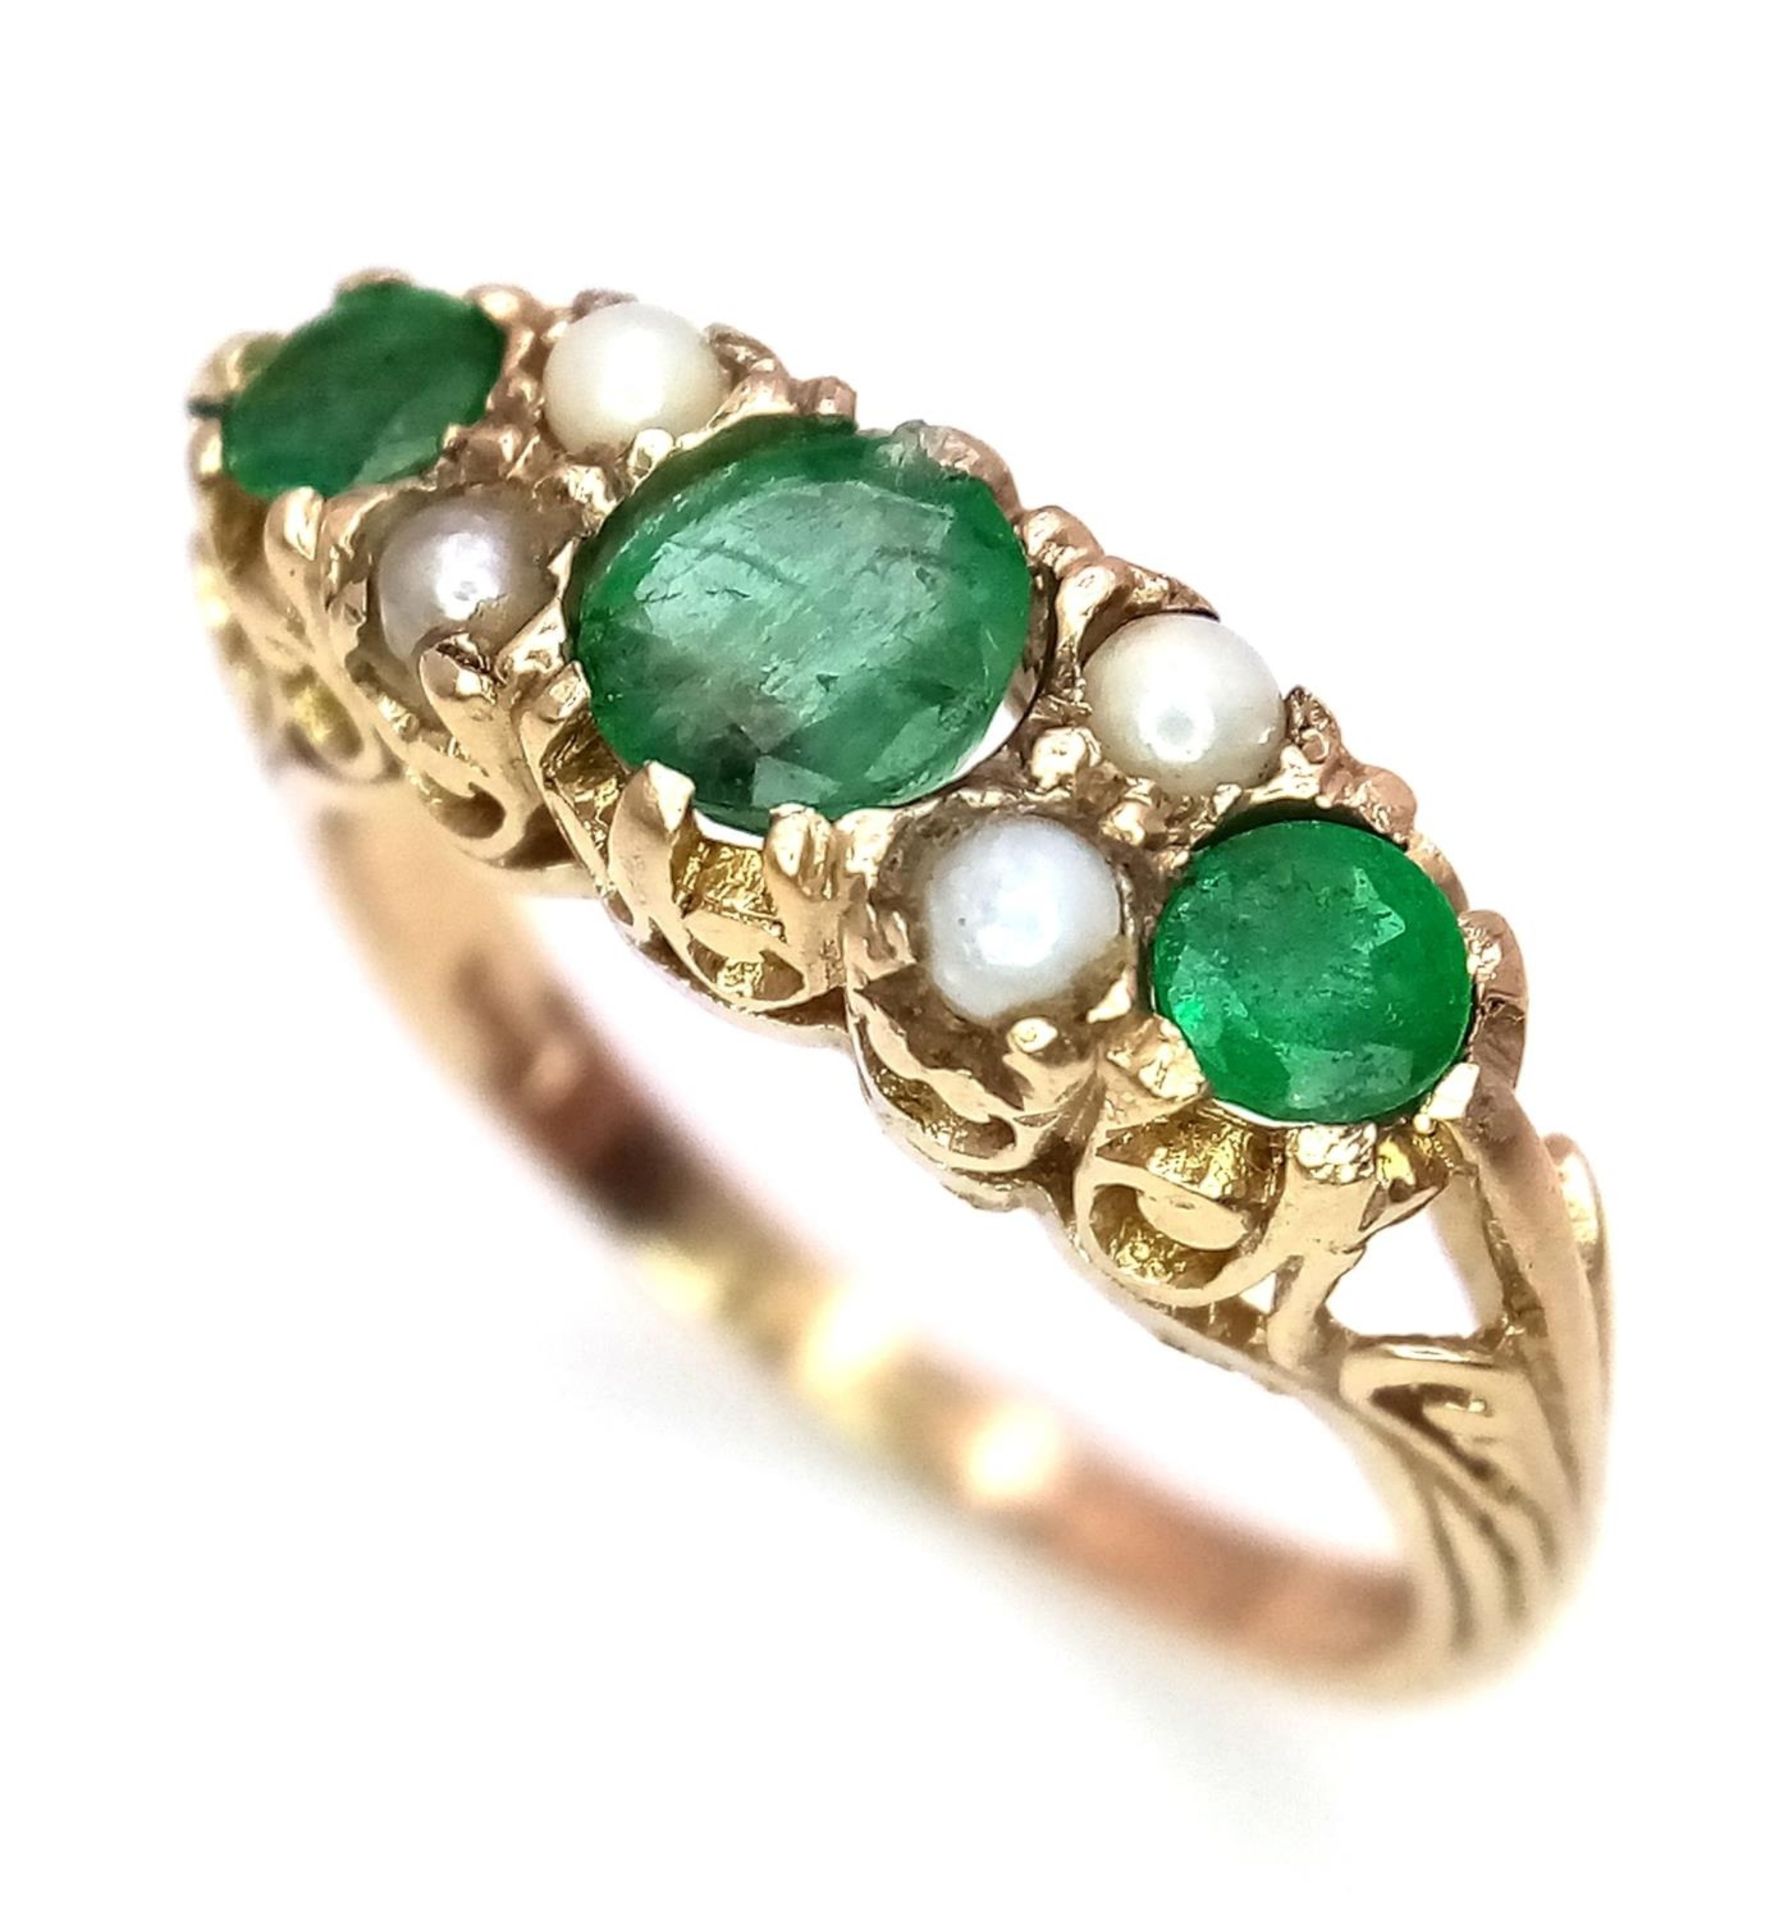 A 9K Yellow Gold Emerald and Seed Pearl Ring. Size P, 3.52g total weight.